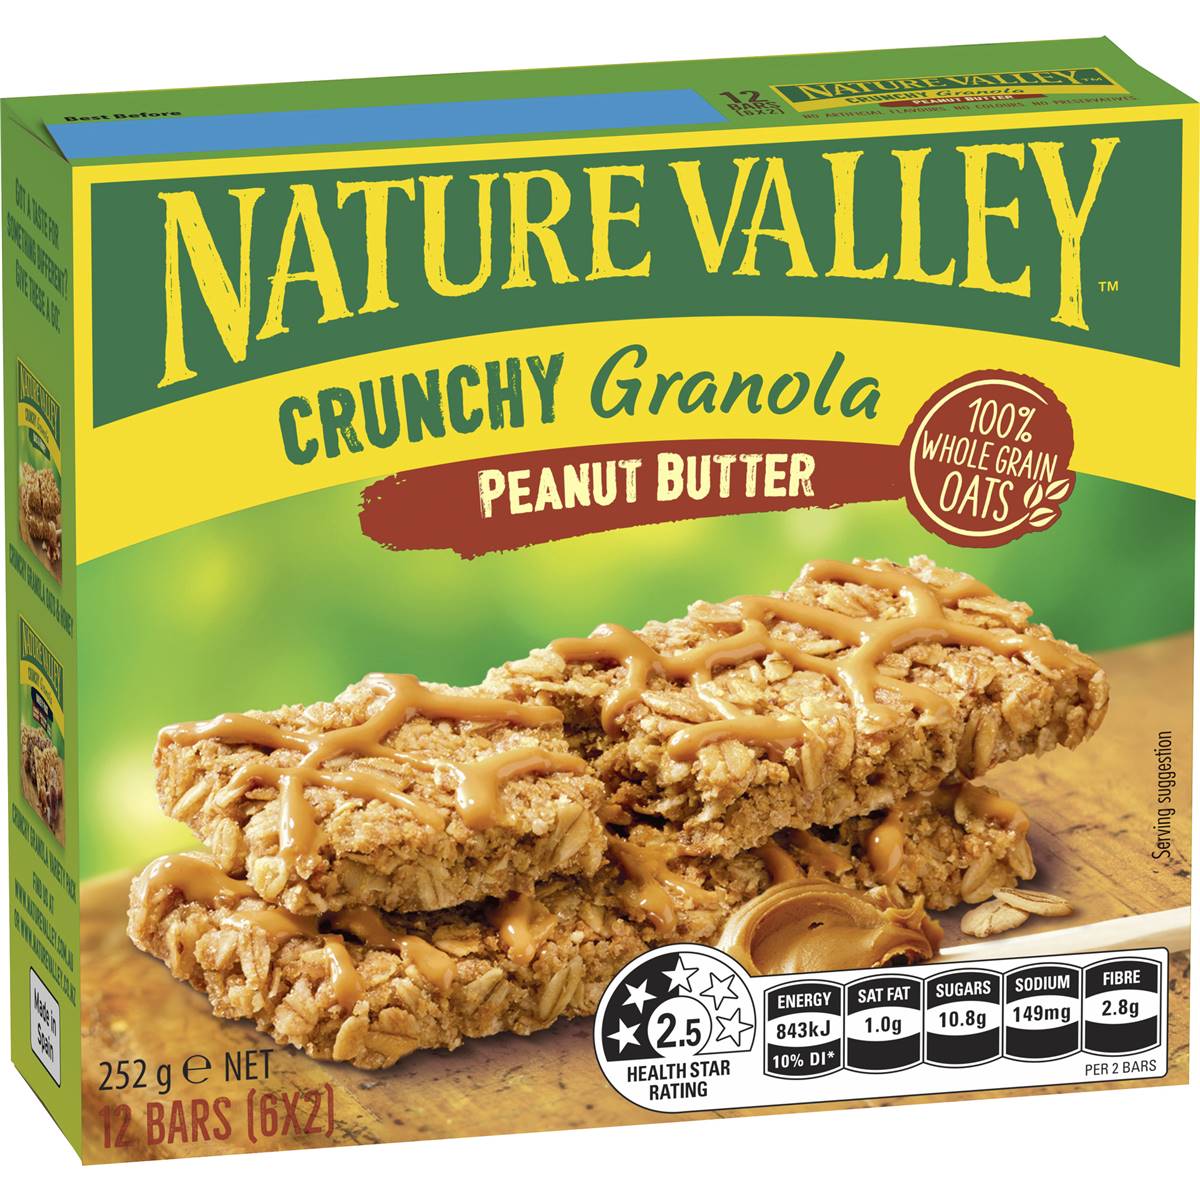 Calories in Nature Valley Crunchy Peanut Butter